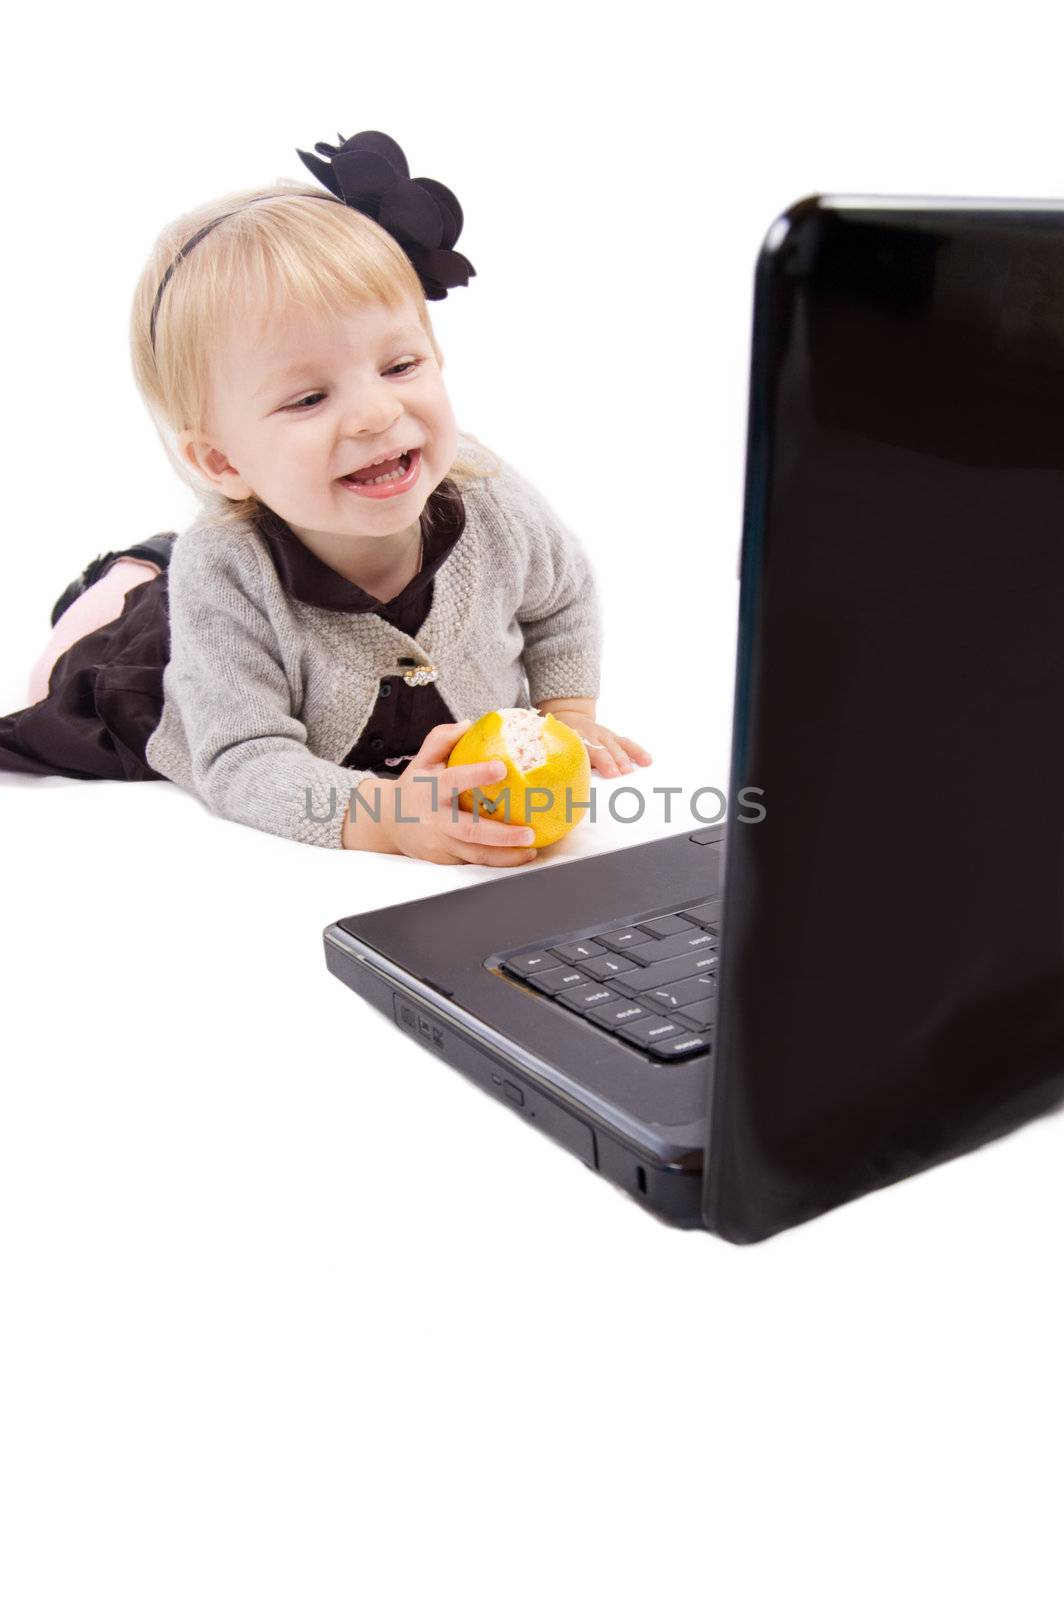 Baby girl playing with laptop over white